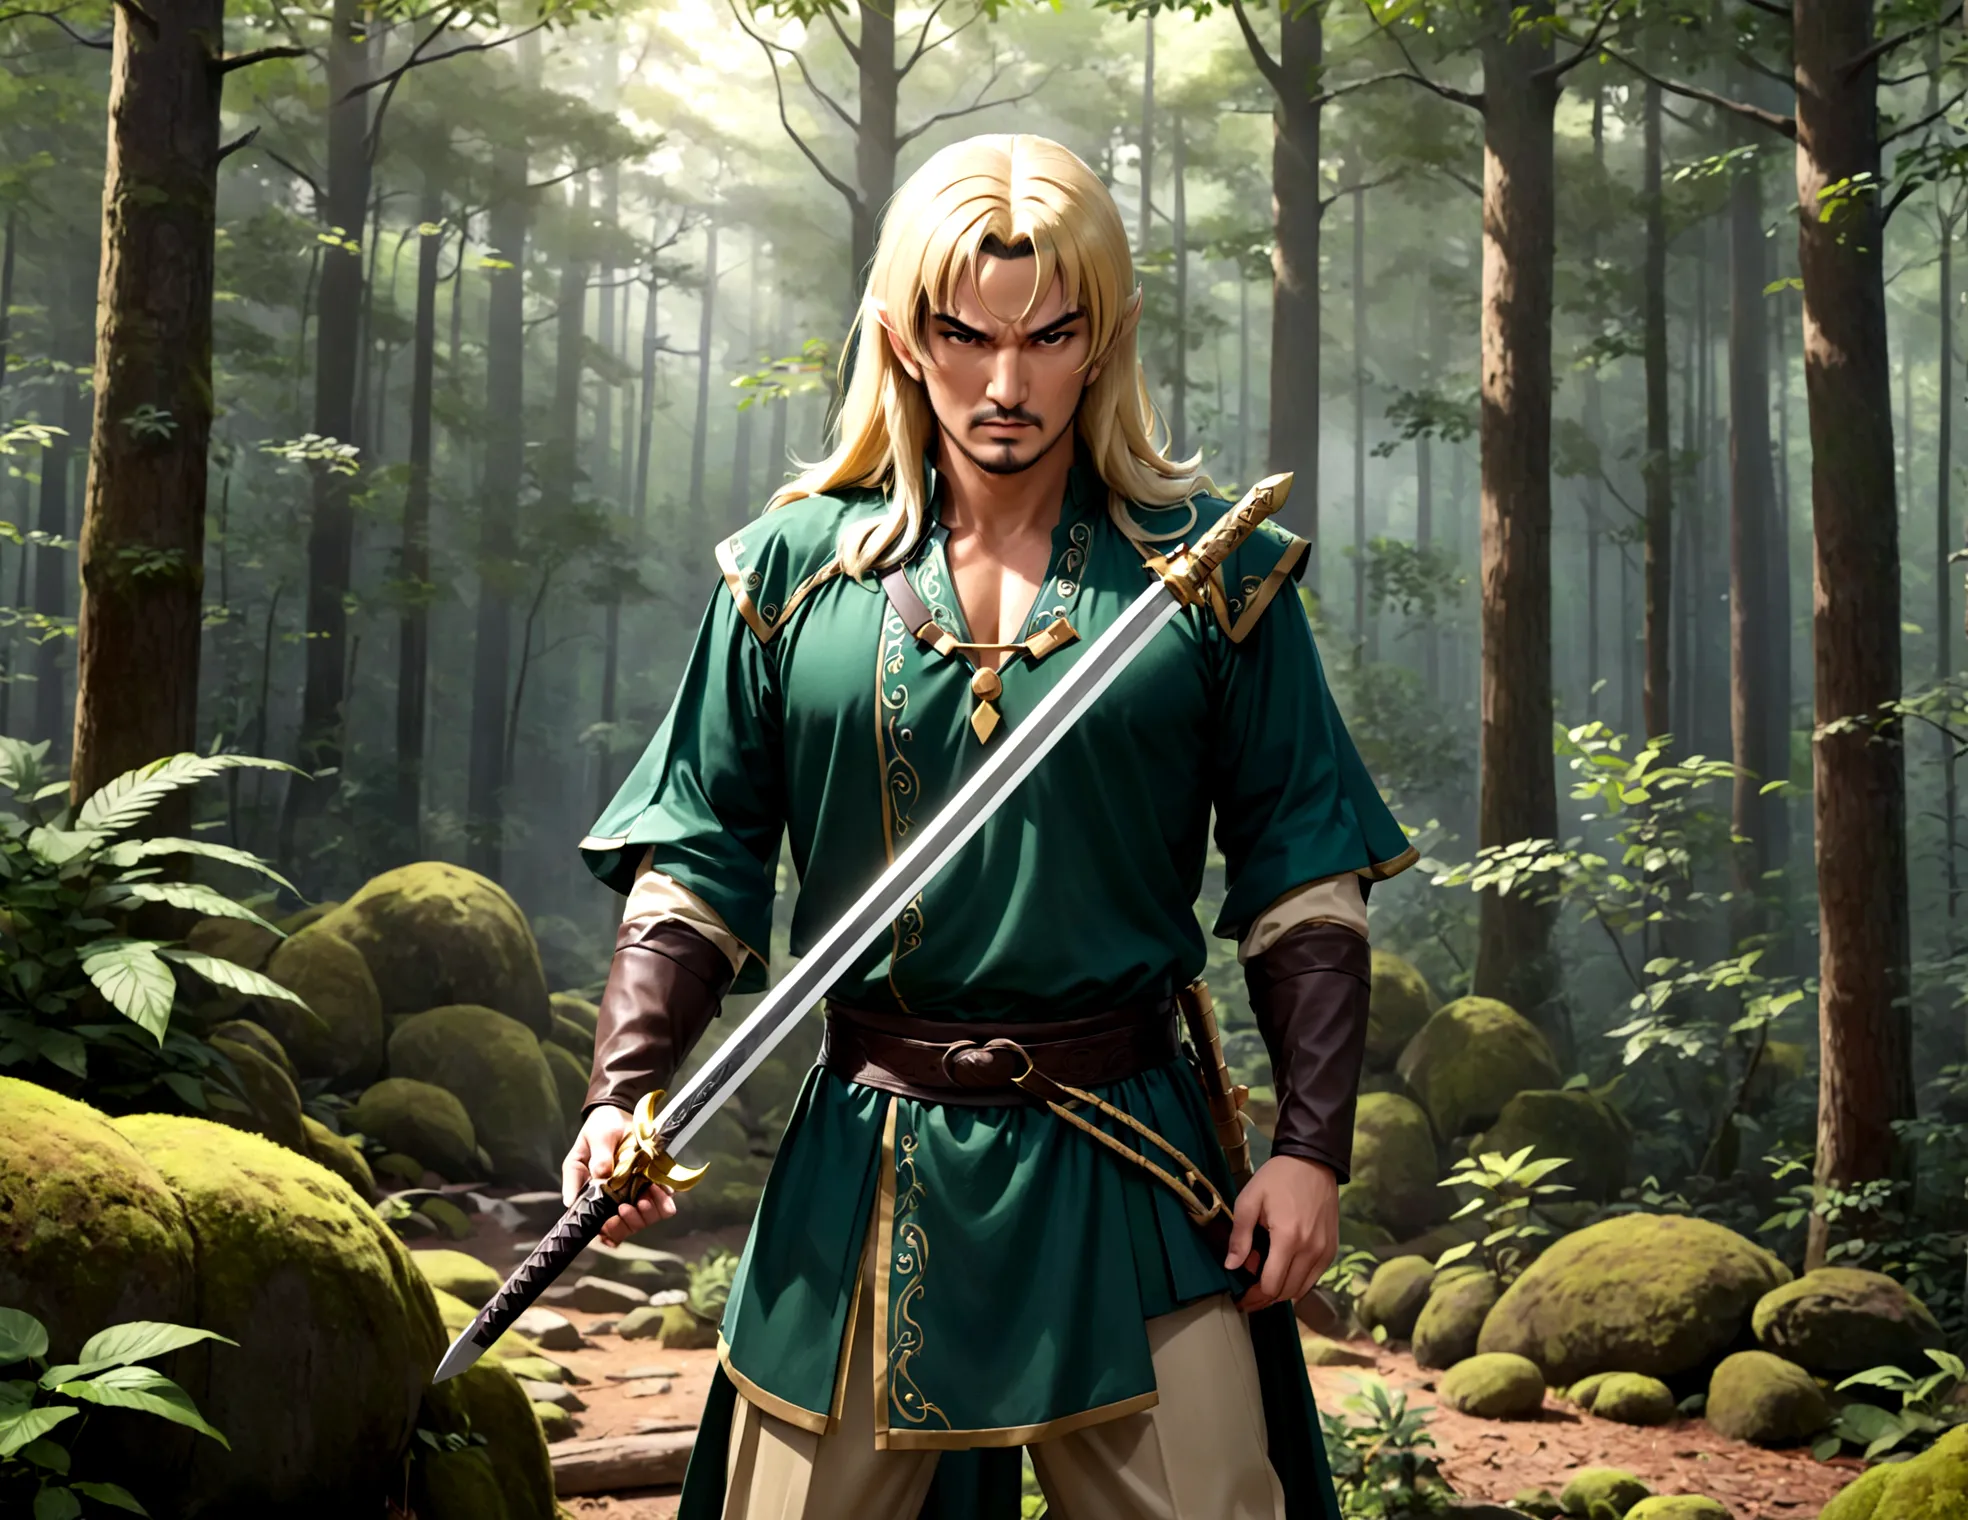 Steven Seagal (current, modern) in the role of Link (Link costume, blonde wig over black hair, wooden sword at side), akido pose...